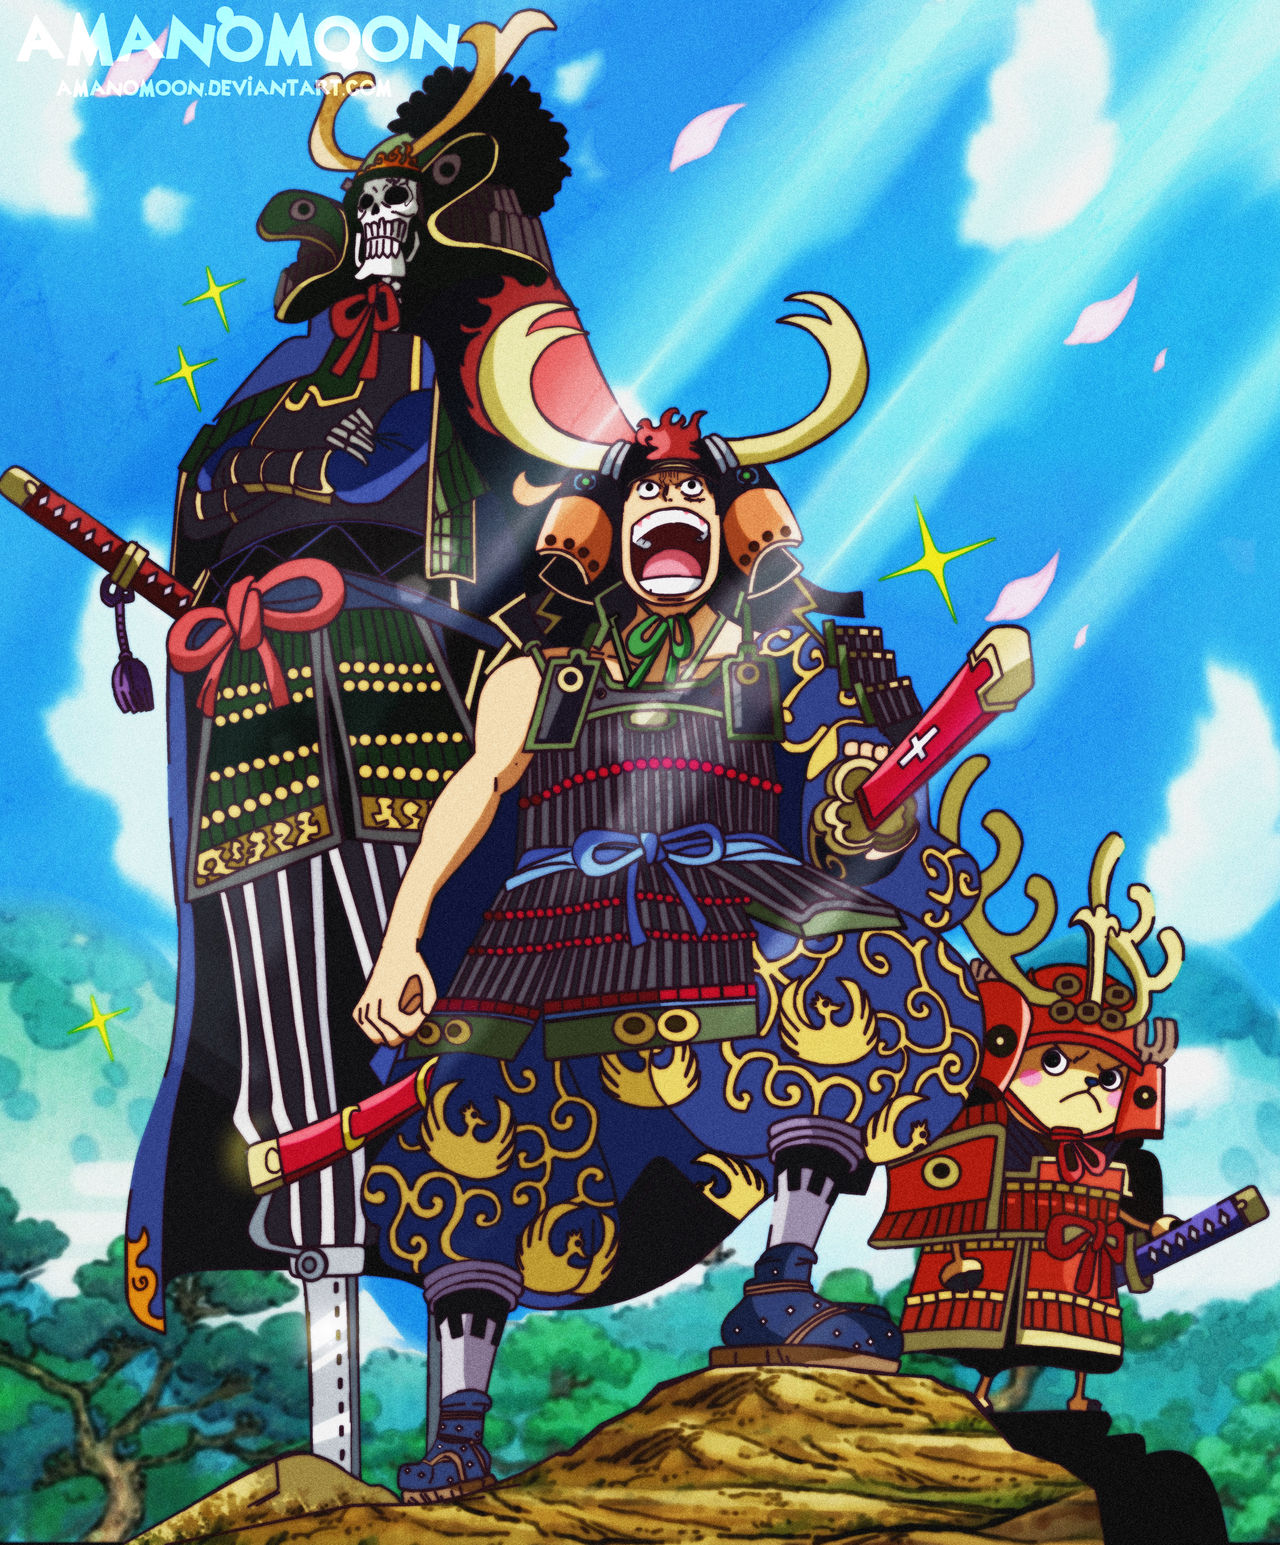 One Piece Chapter 983 Luffy vs Ulti Anime Style by Amanomoon on DeviantArt